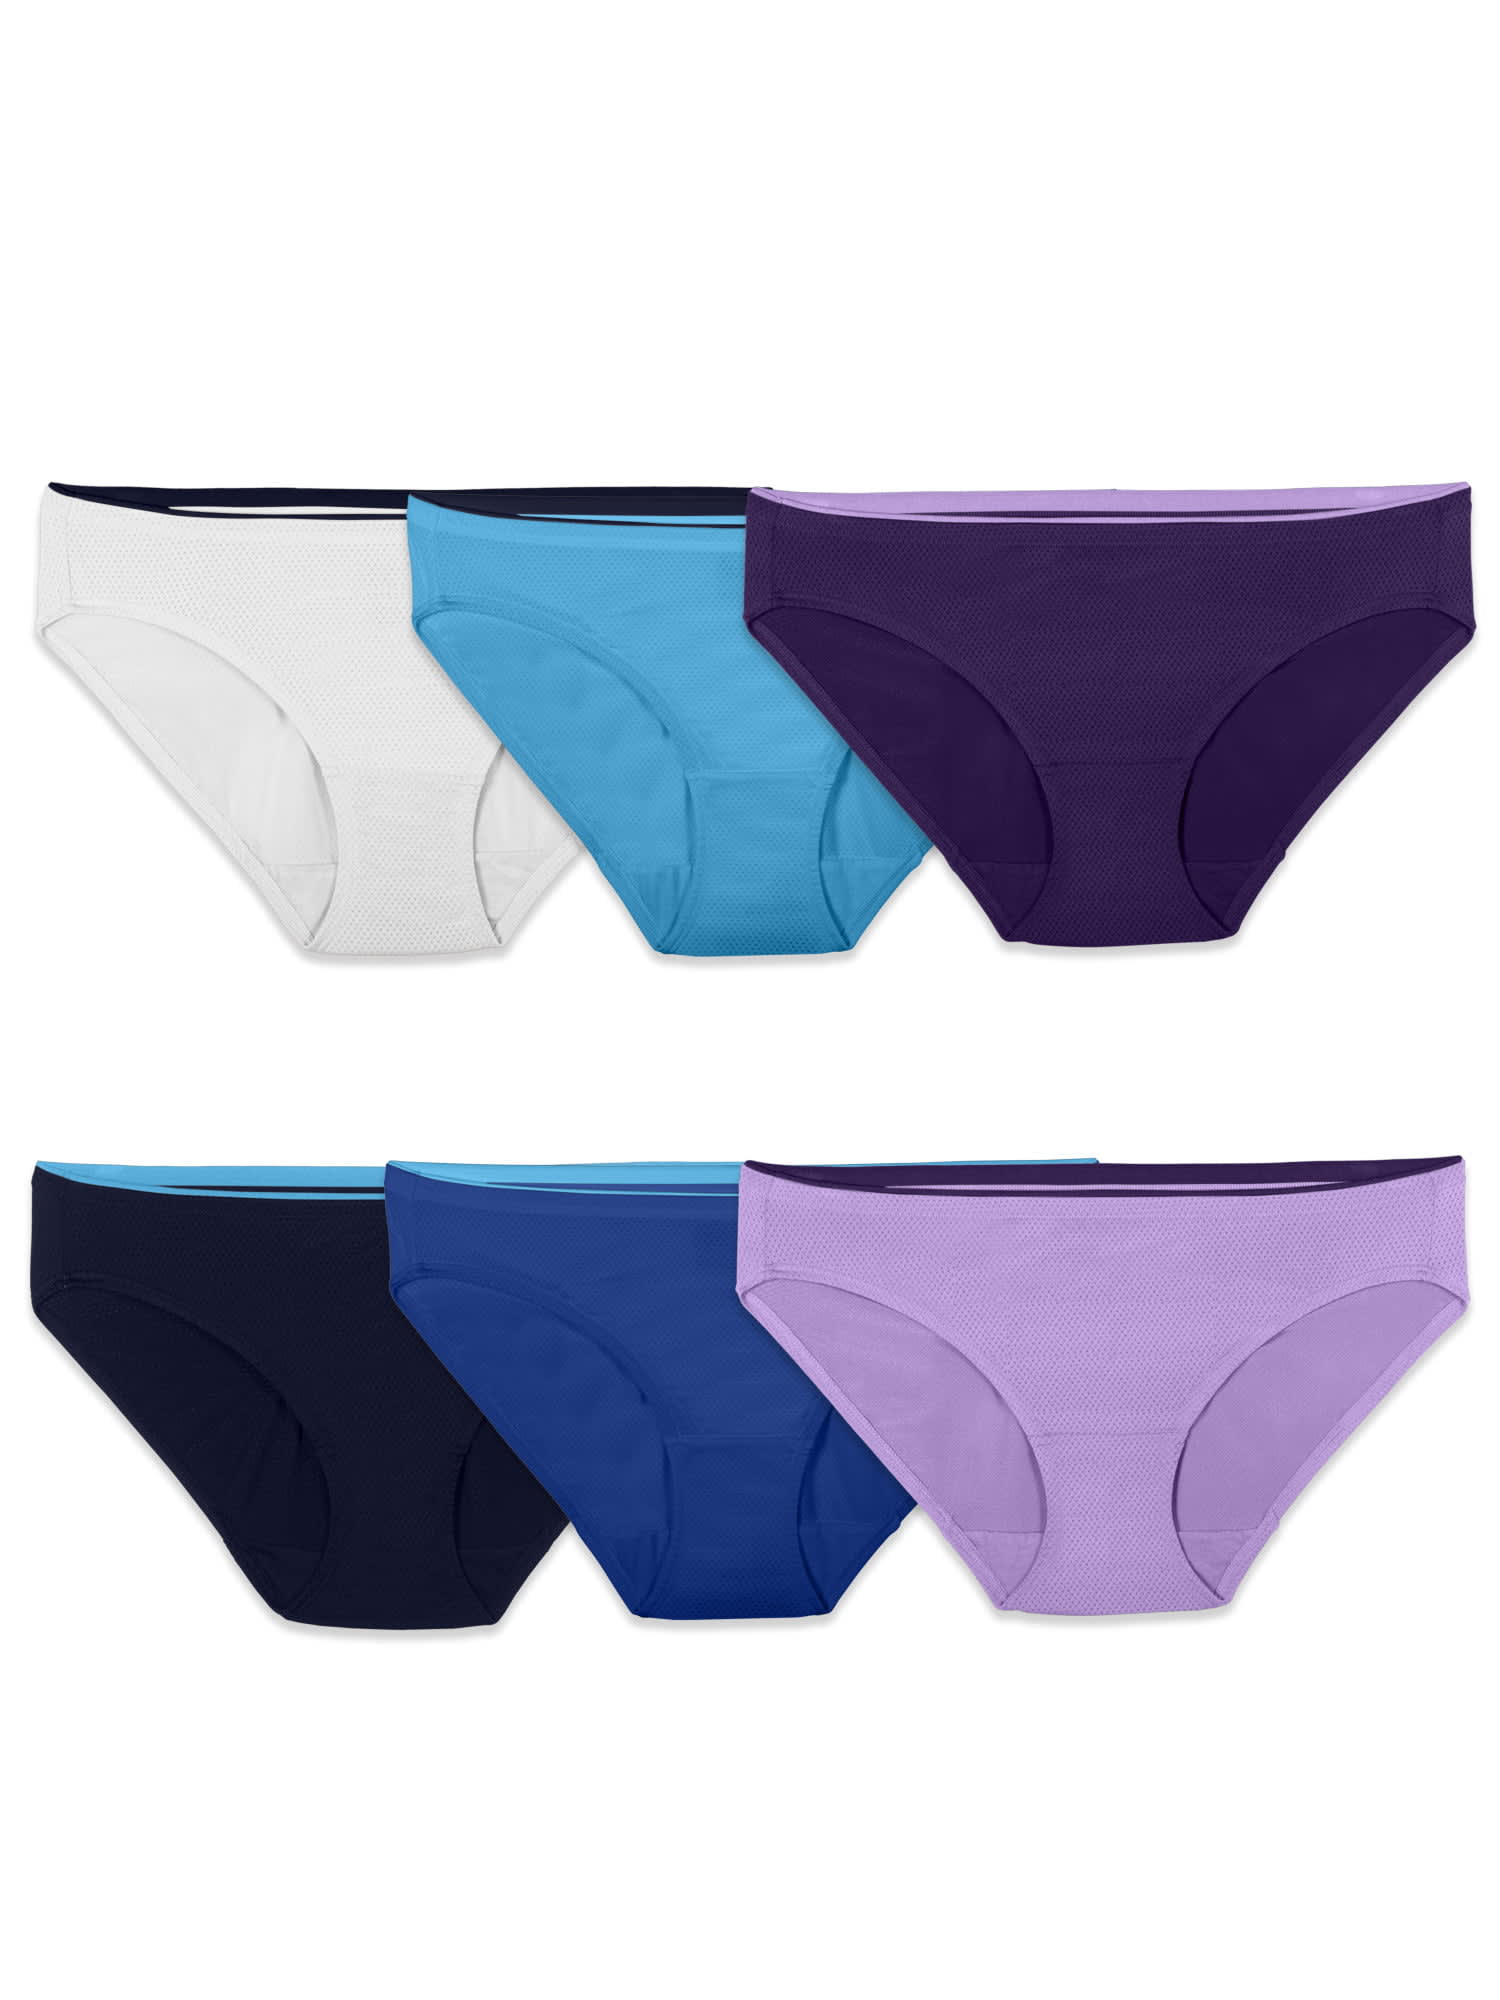 Fruit of the Loom Men's Fashion Briefs, 6 Pack, Sizes S-3XL - DroneUp  Delivery